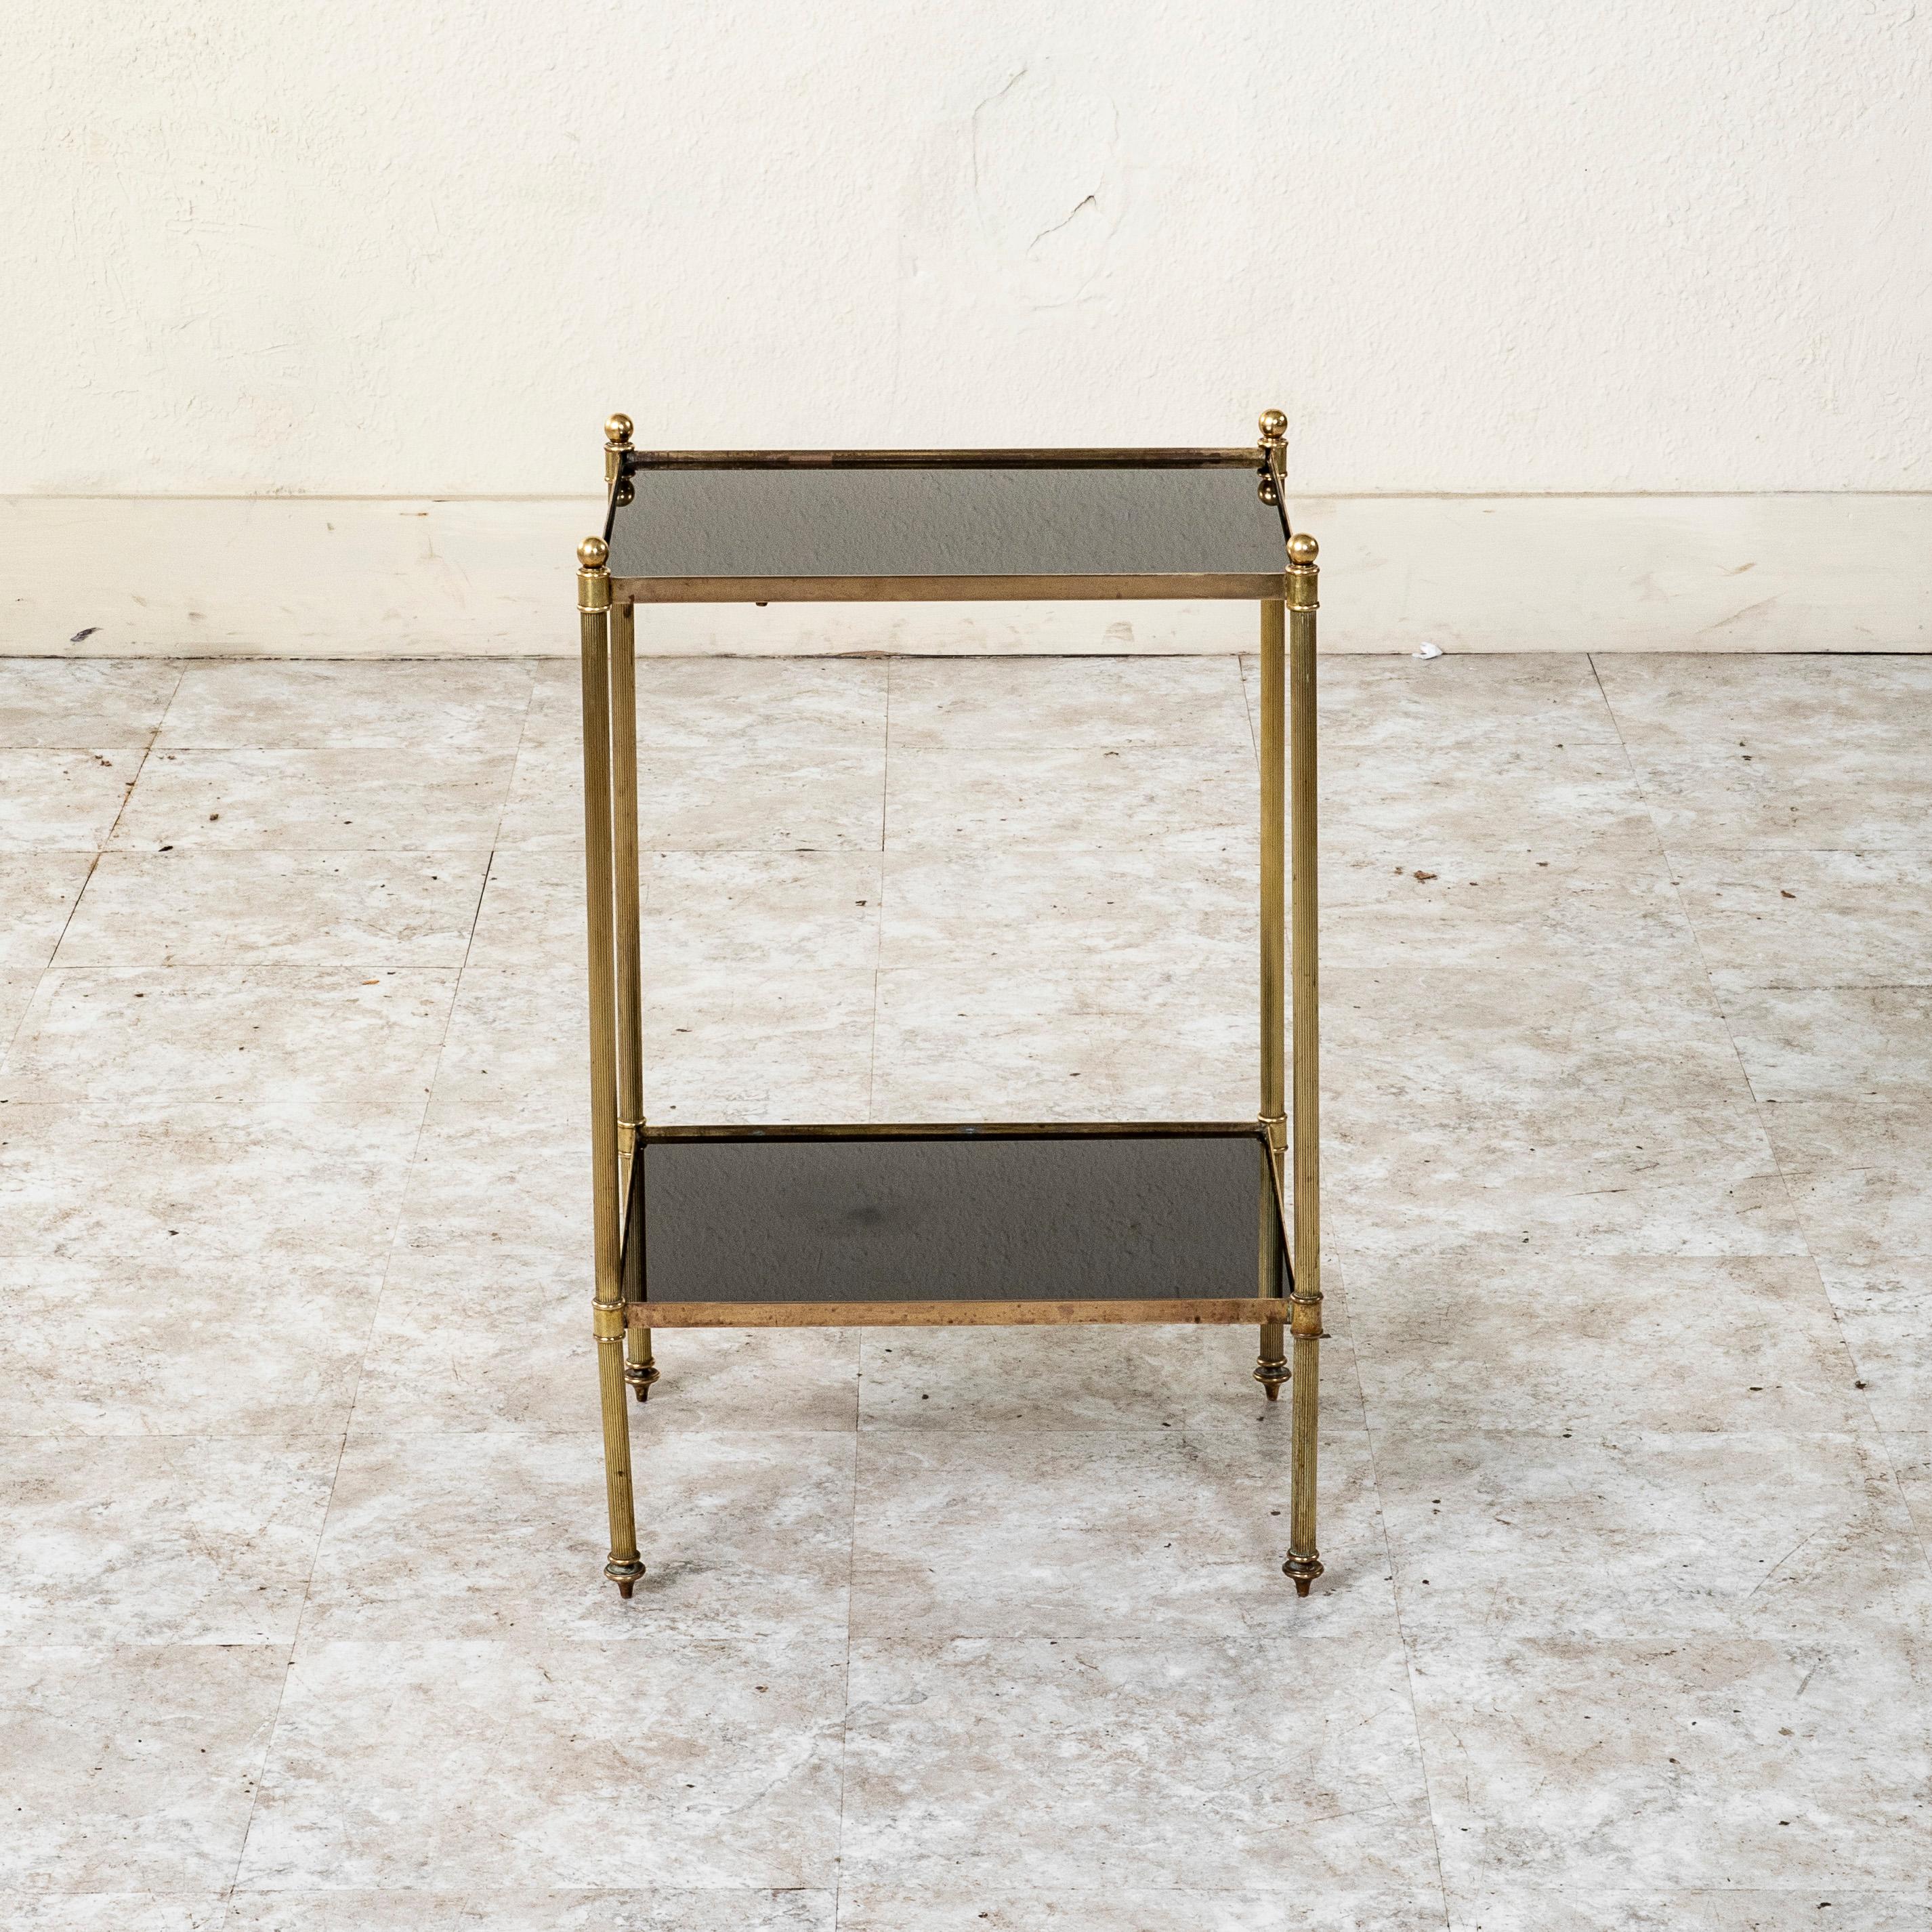 This small scale mid-century French brass side table features an upper and lower shelf fitted with its original black glass. The table rests on fluted legs capped with brass finials and finished with finial feet. c. 1960